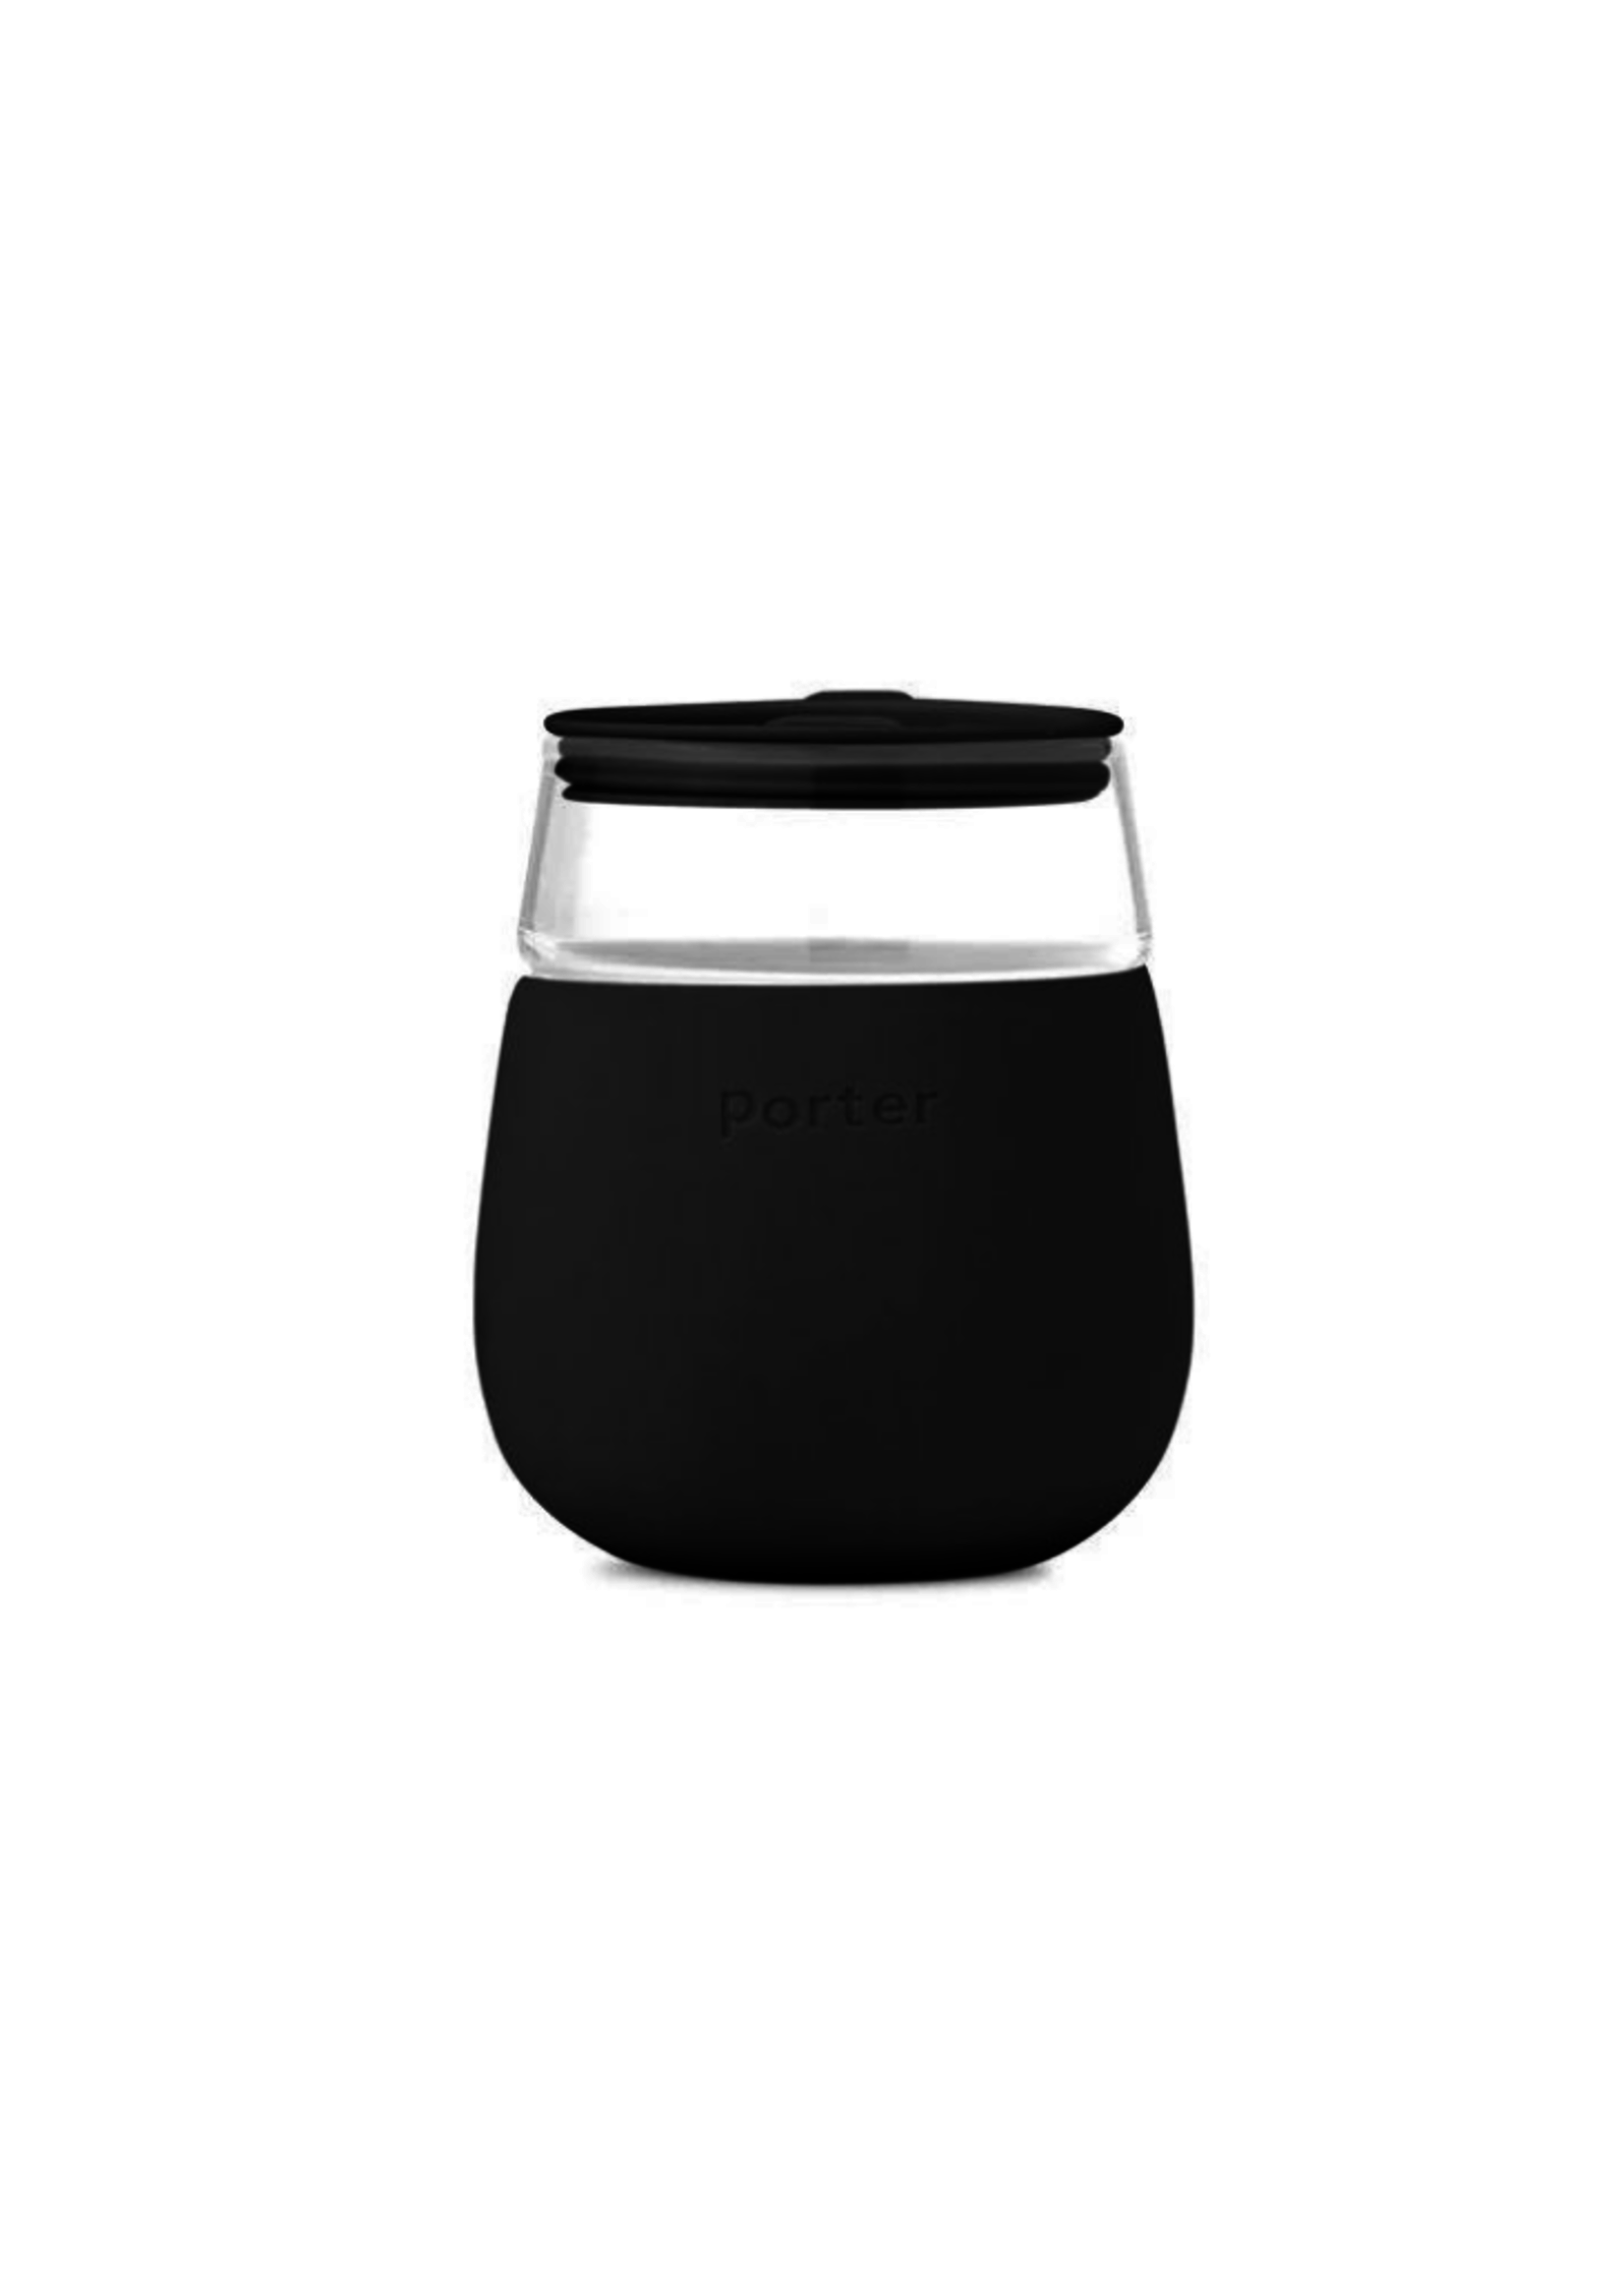 W&P Design Porter To-Go Tumbler Glass Cup: Charcoal